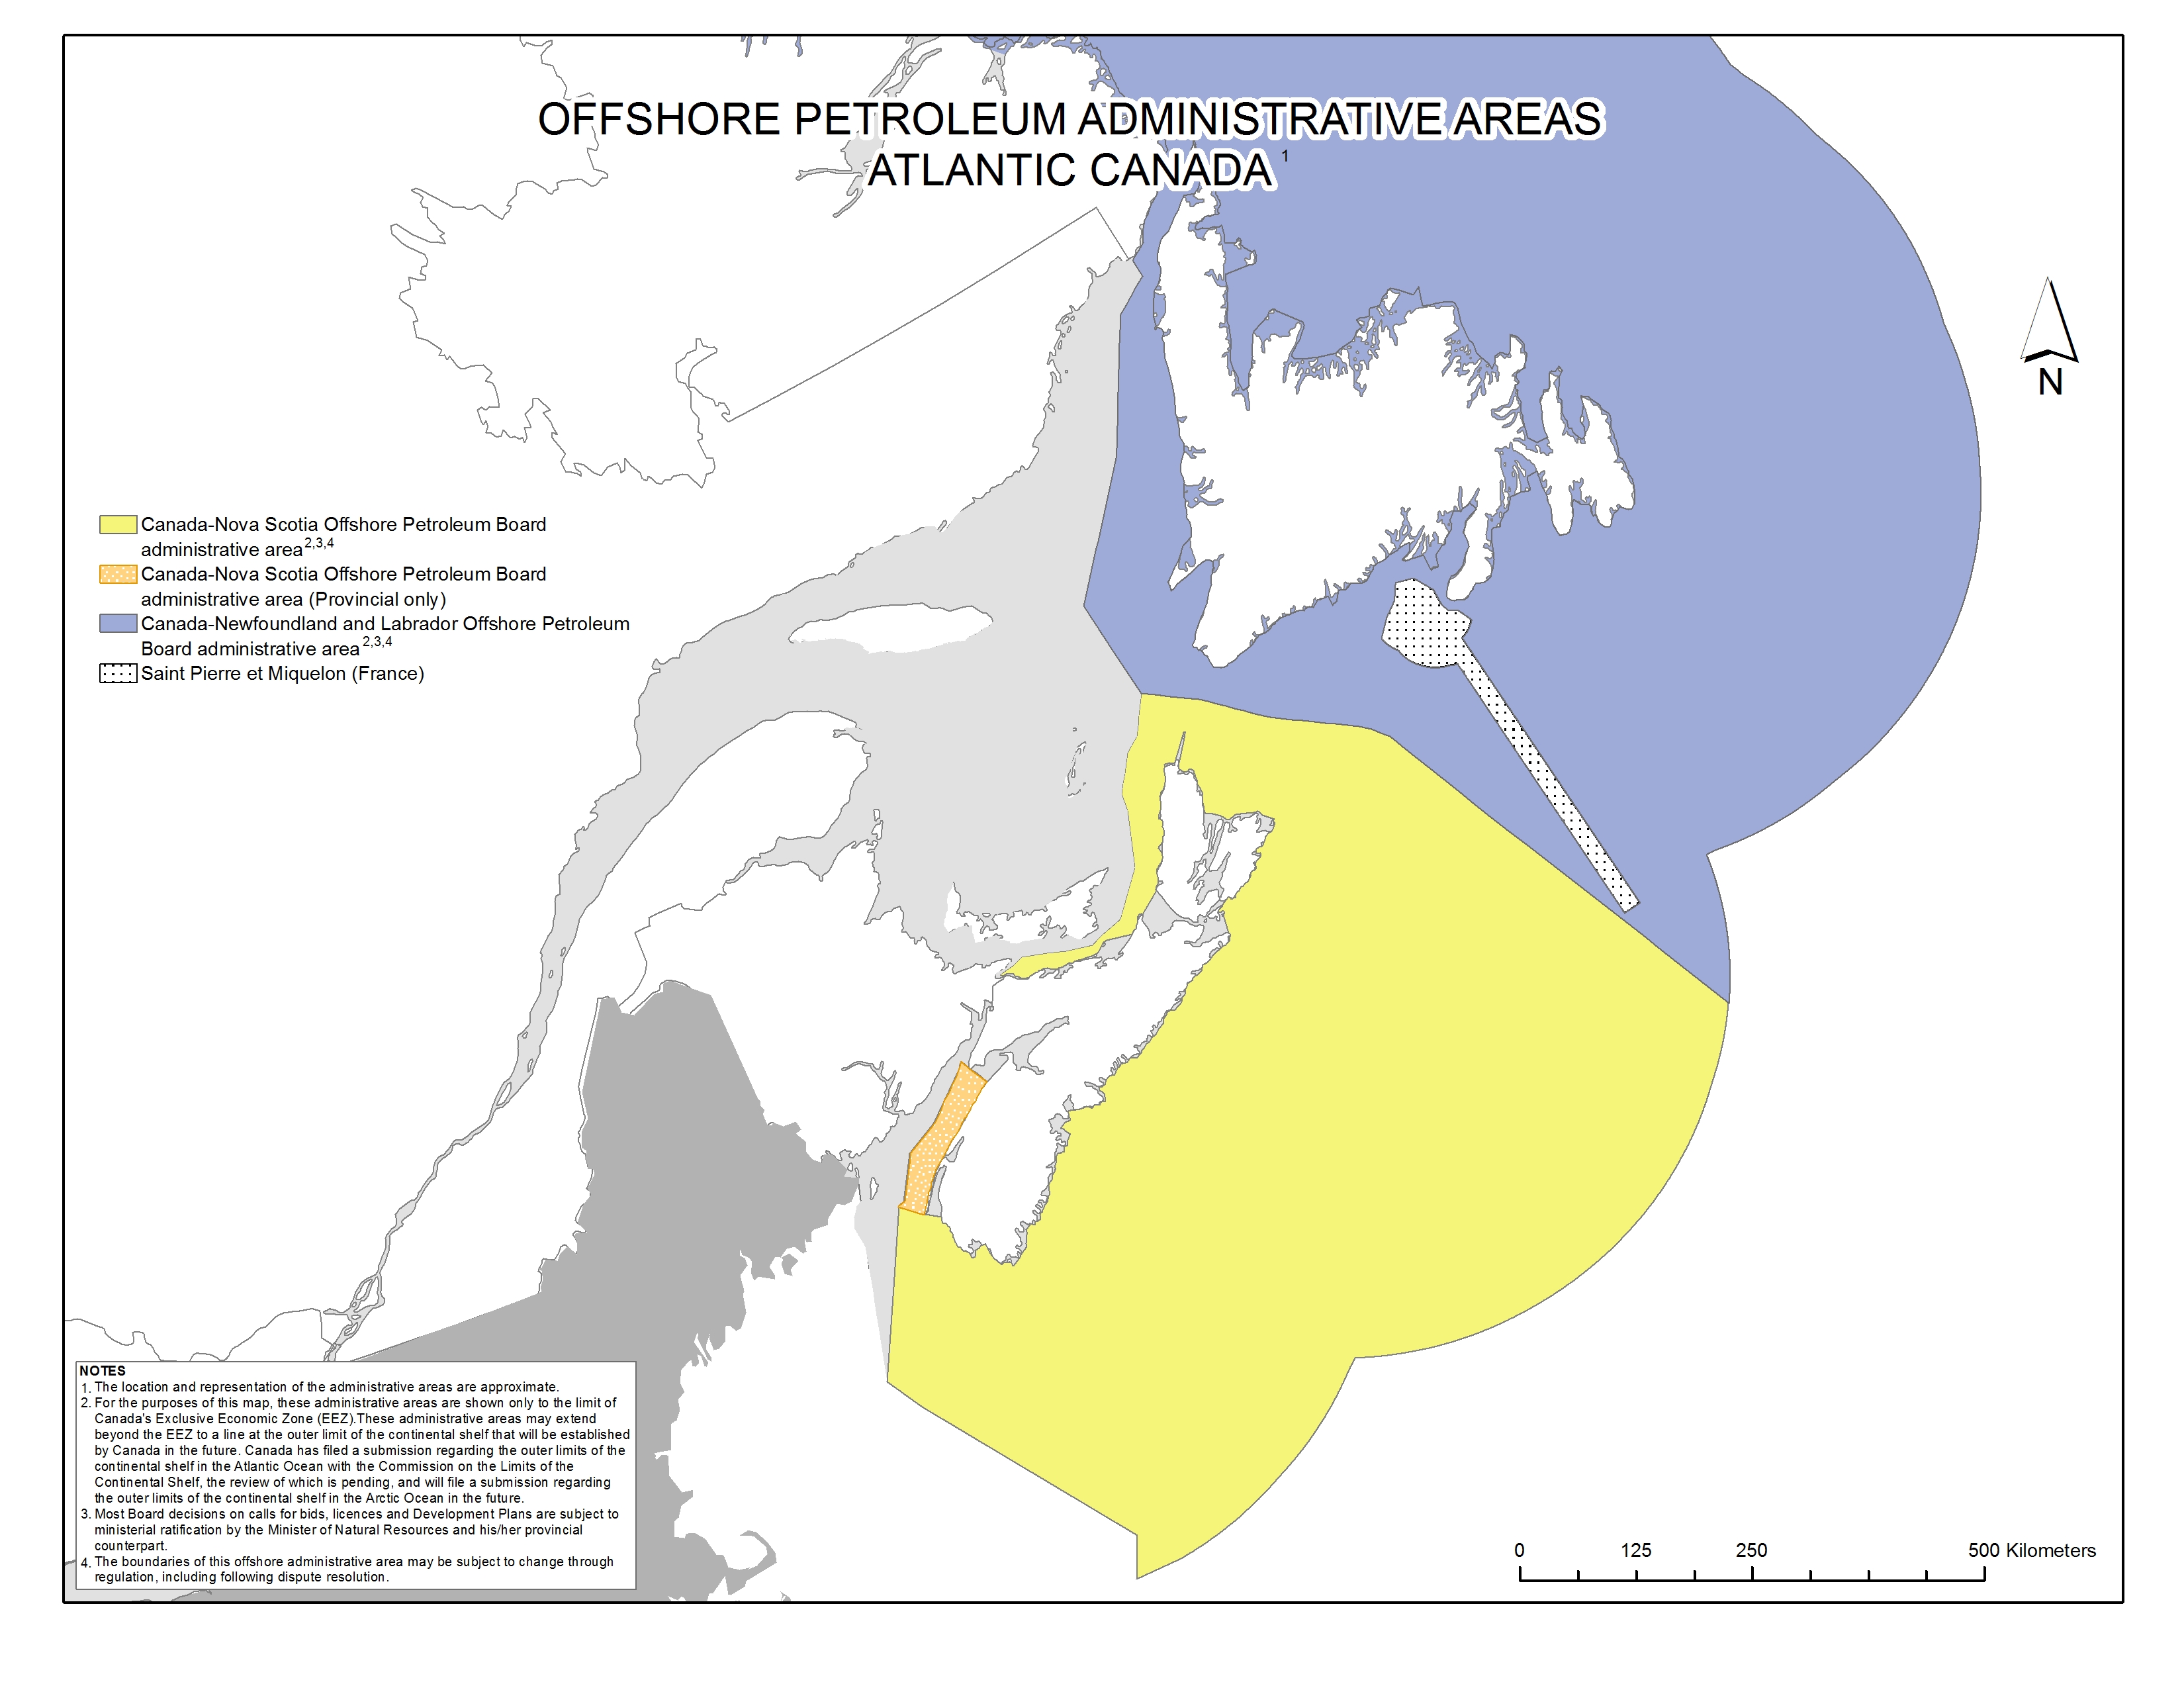 Map of offshore petroleum administrative areas in Atlantic Canada coloured in dark blue, light blue, blue, orange and yellow